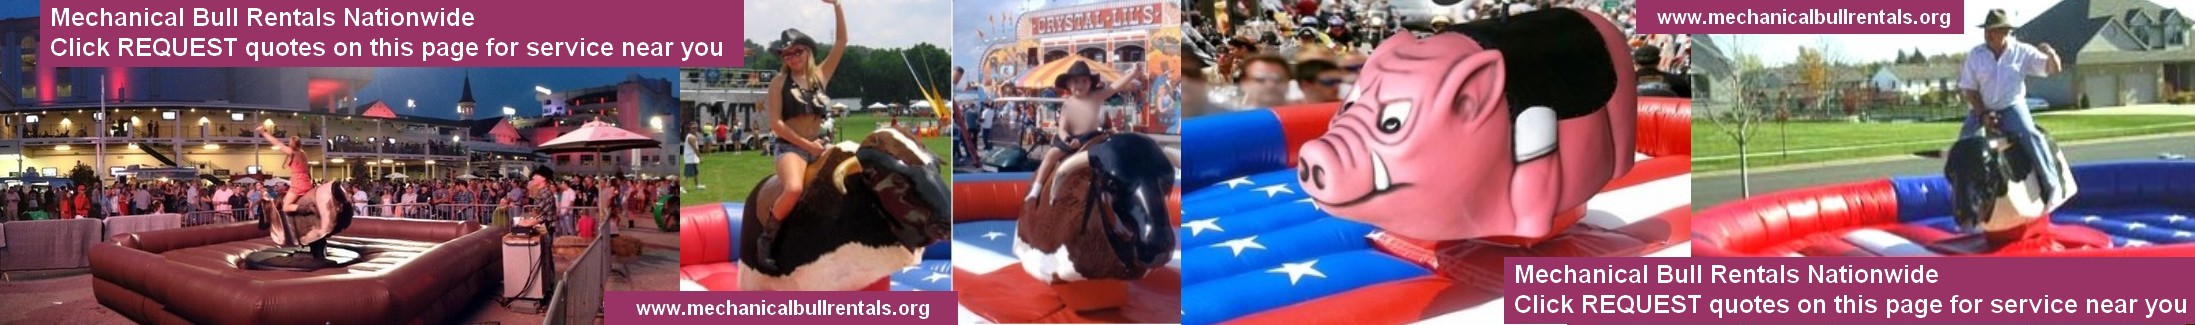 Mechanical Bull Rentals El Paso Texas TX and near you. Free referrals to local mechanical bull companies LOGO